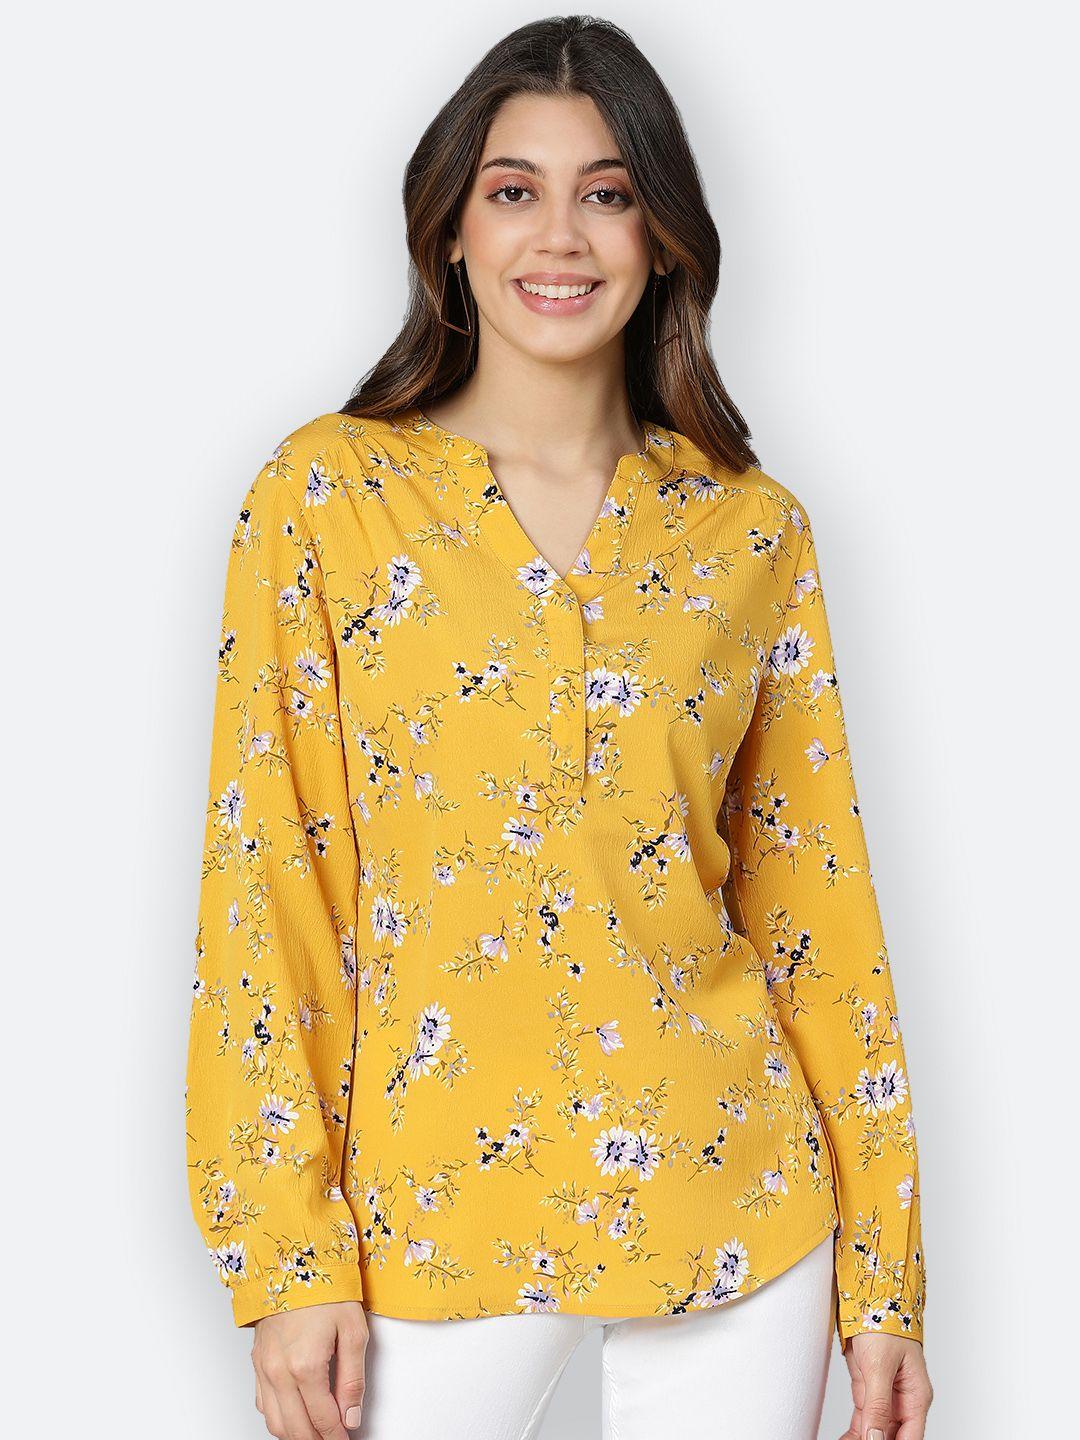 oxolloxo women yellow floral print casual top